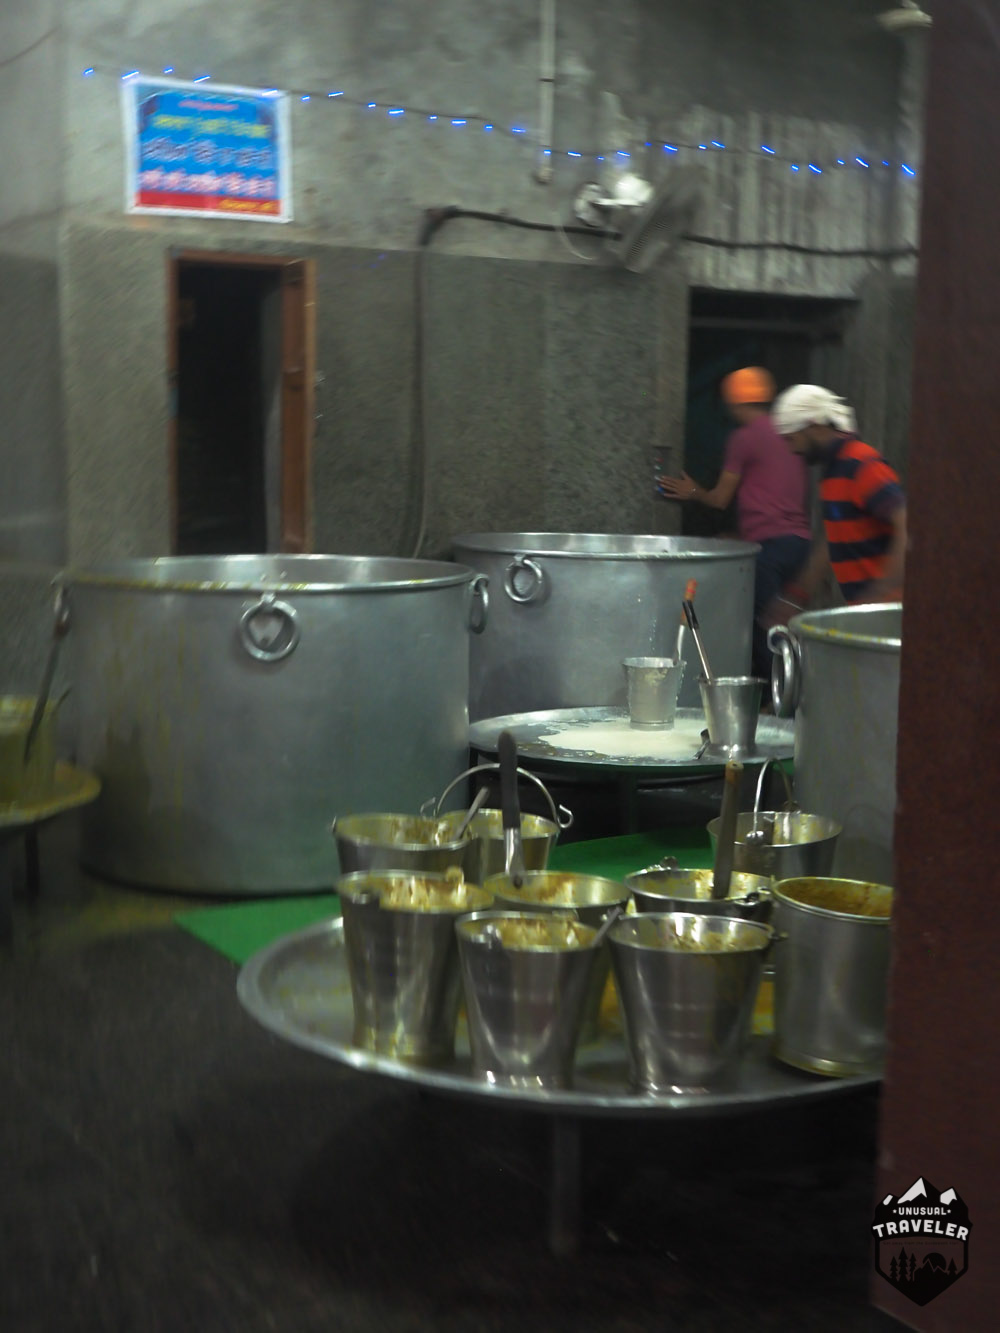 the people working in the kitchen at the golden temple